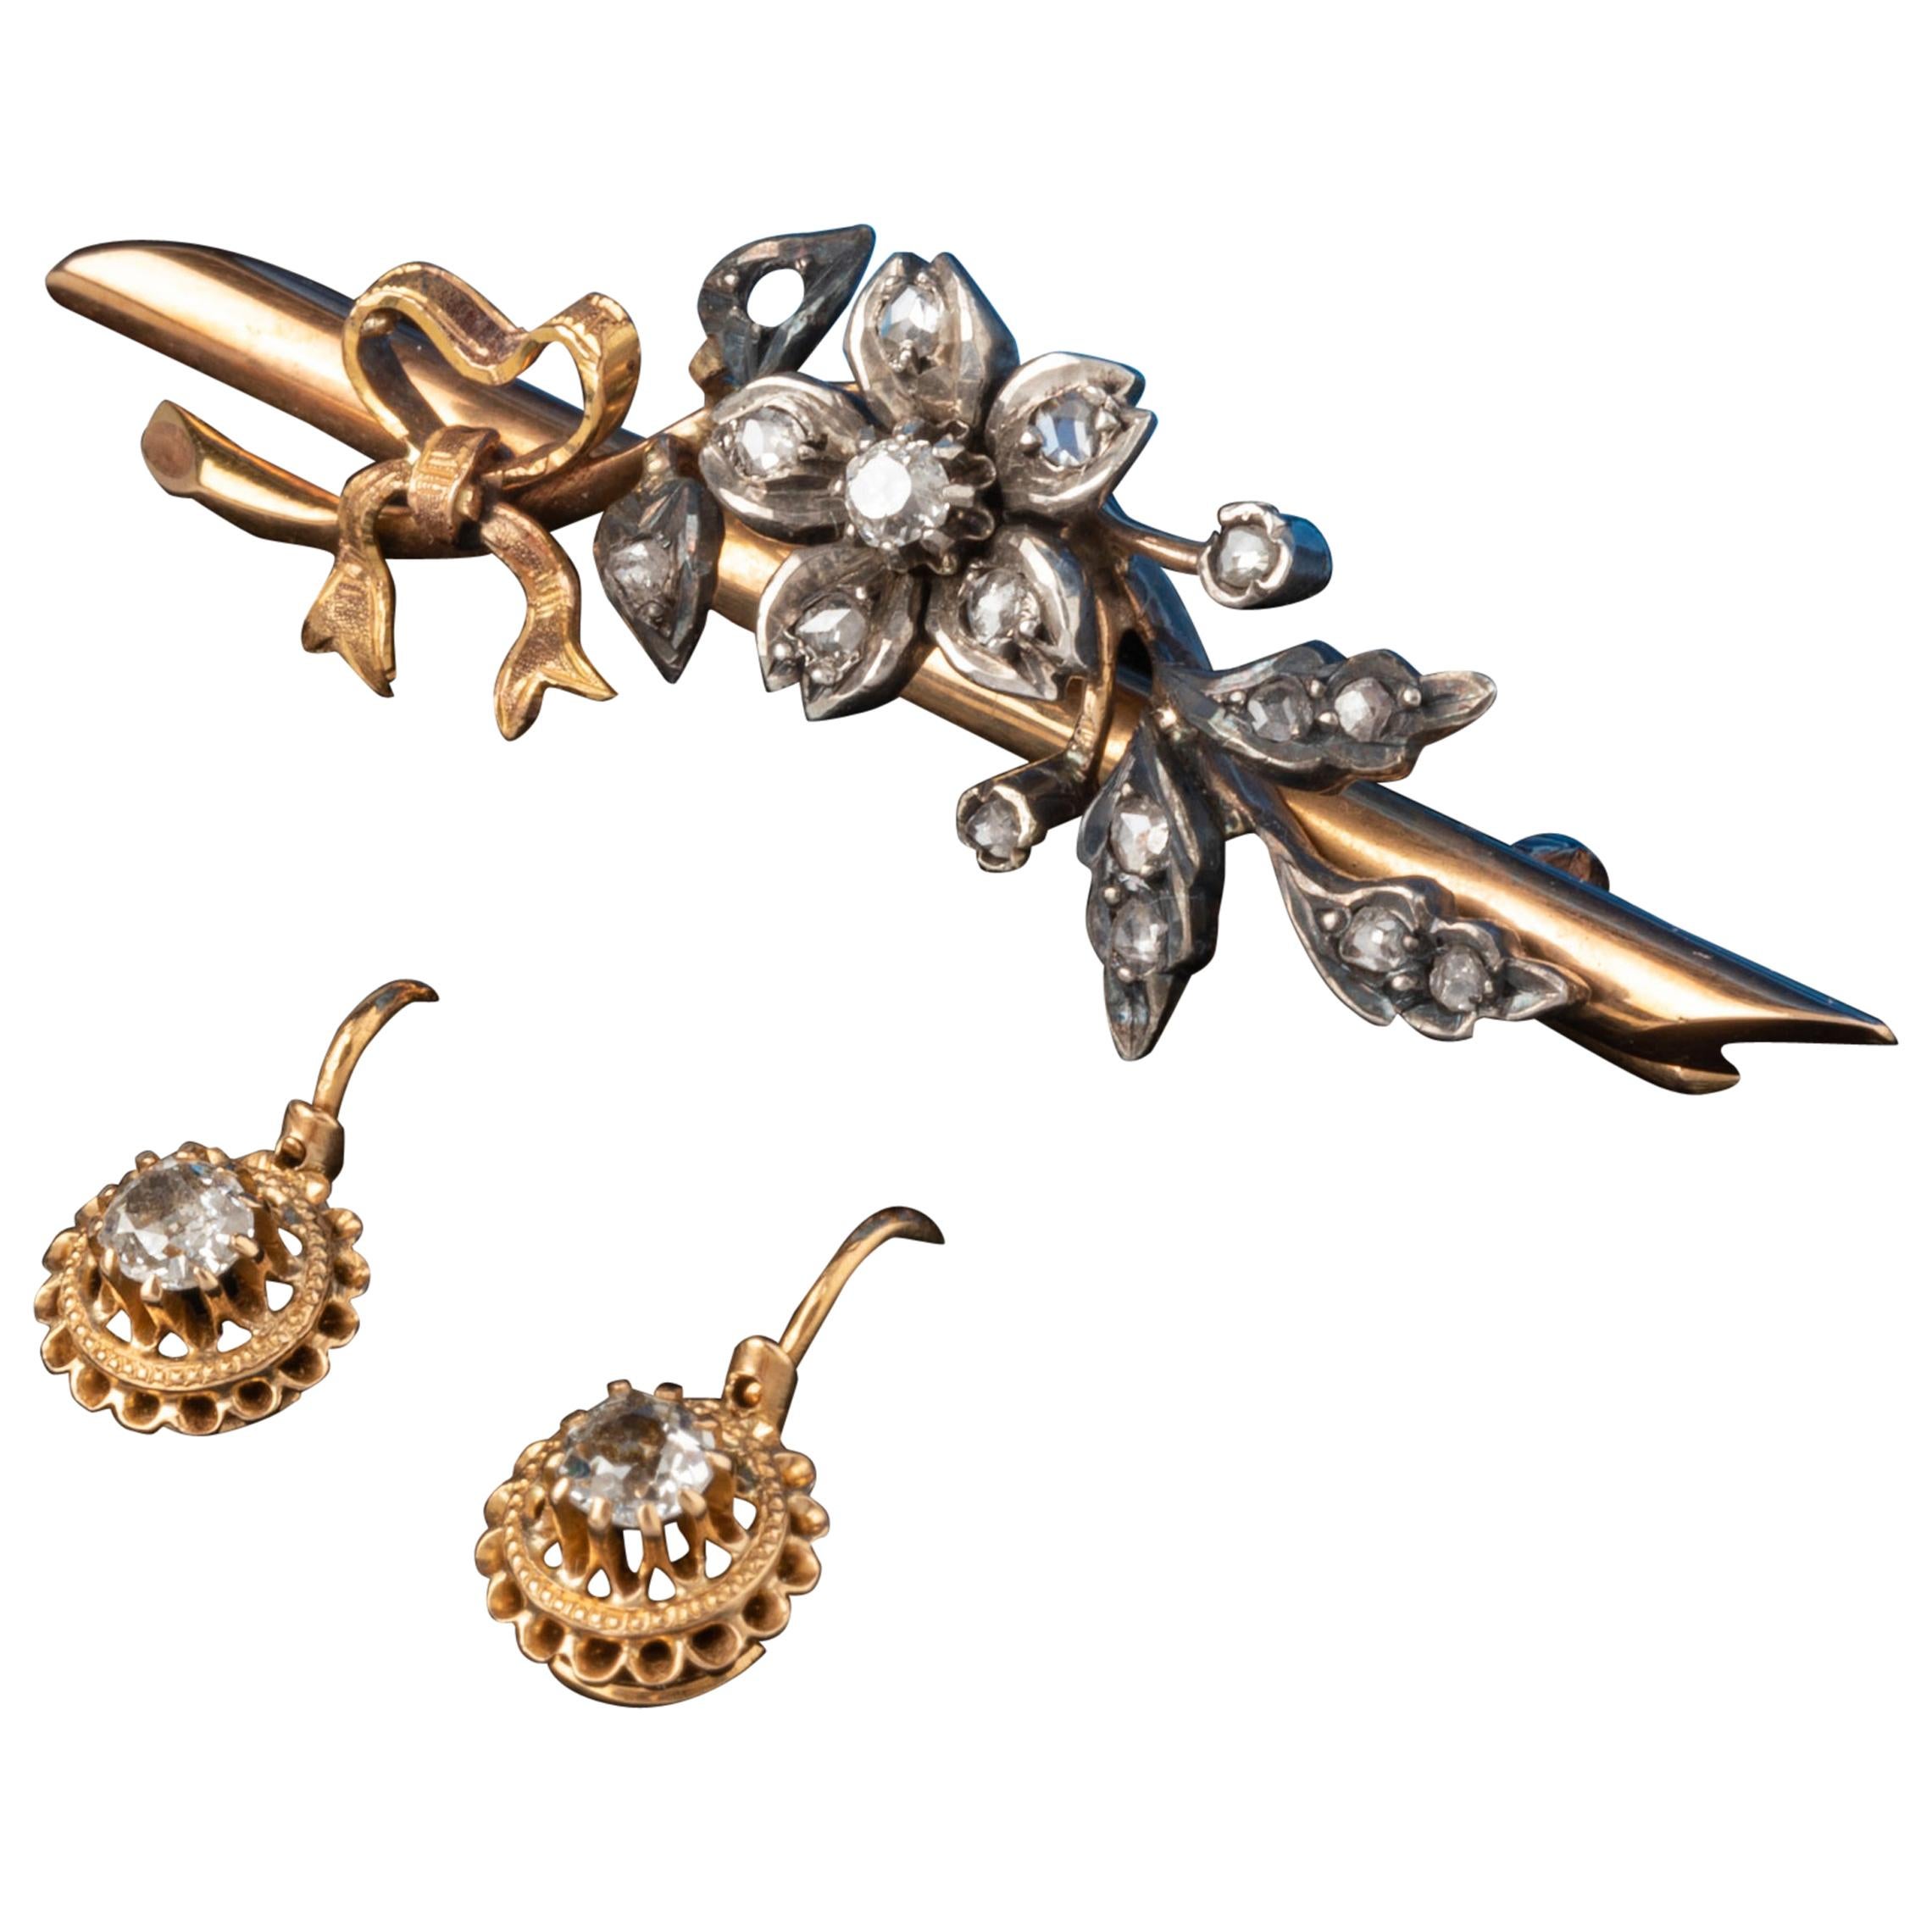 Antique Gold Silver and Diamonds Earrings and Brooch